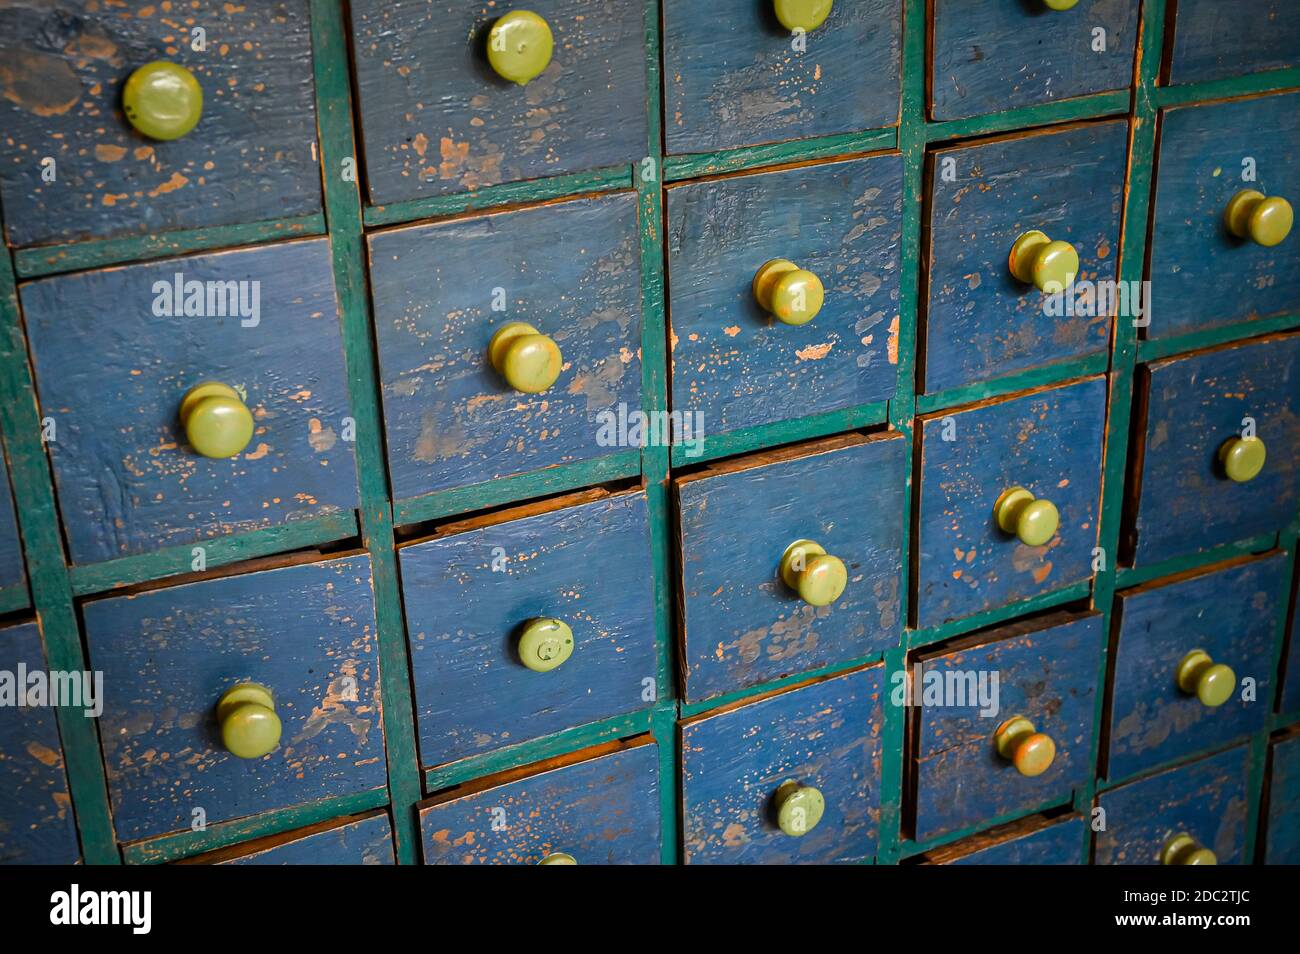 Rows of small wooden drawers with a distressed paint finish. Stock Photo